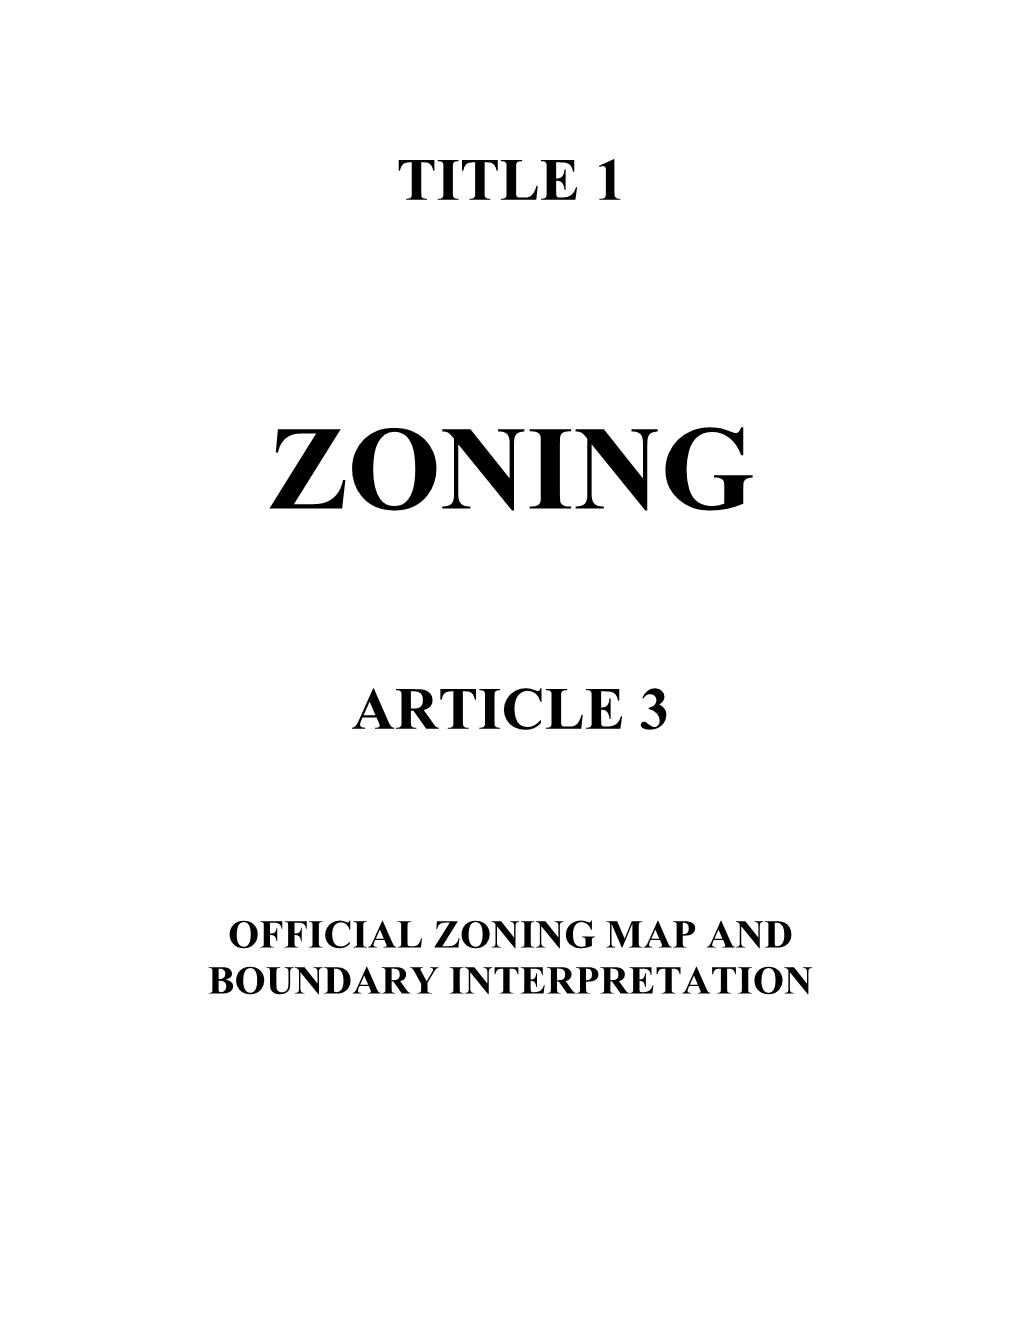 Official Zoning Map and Boundary Interpretation